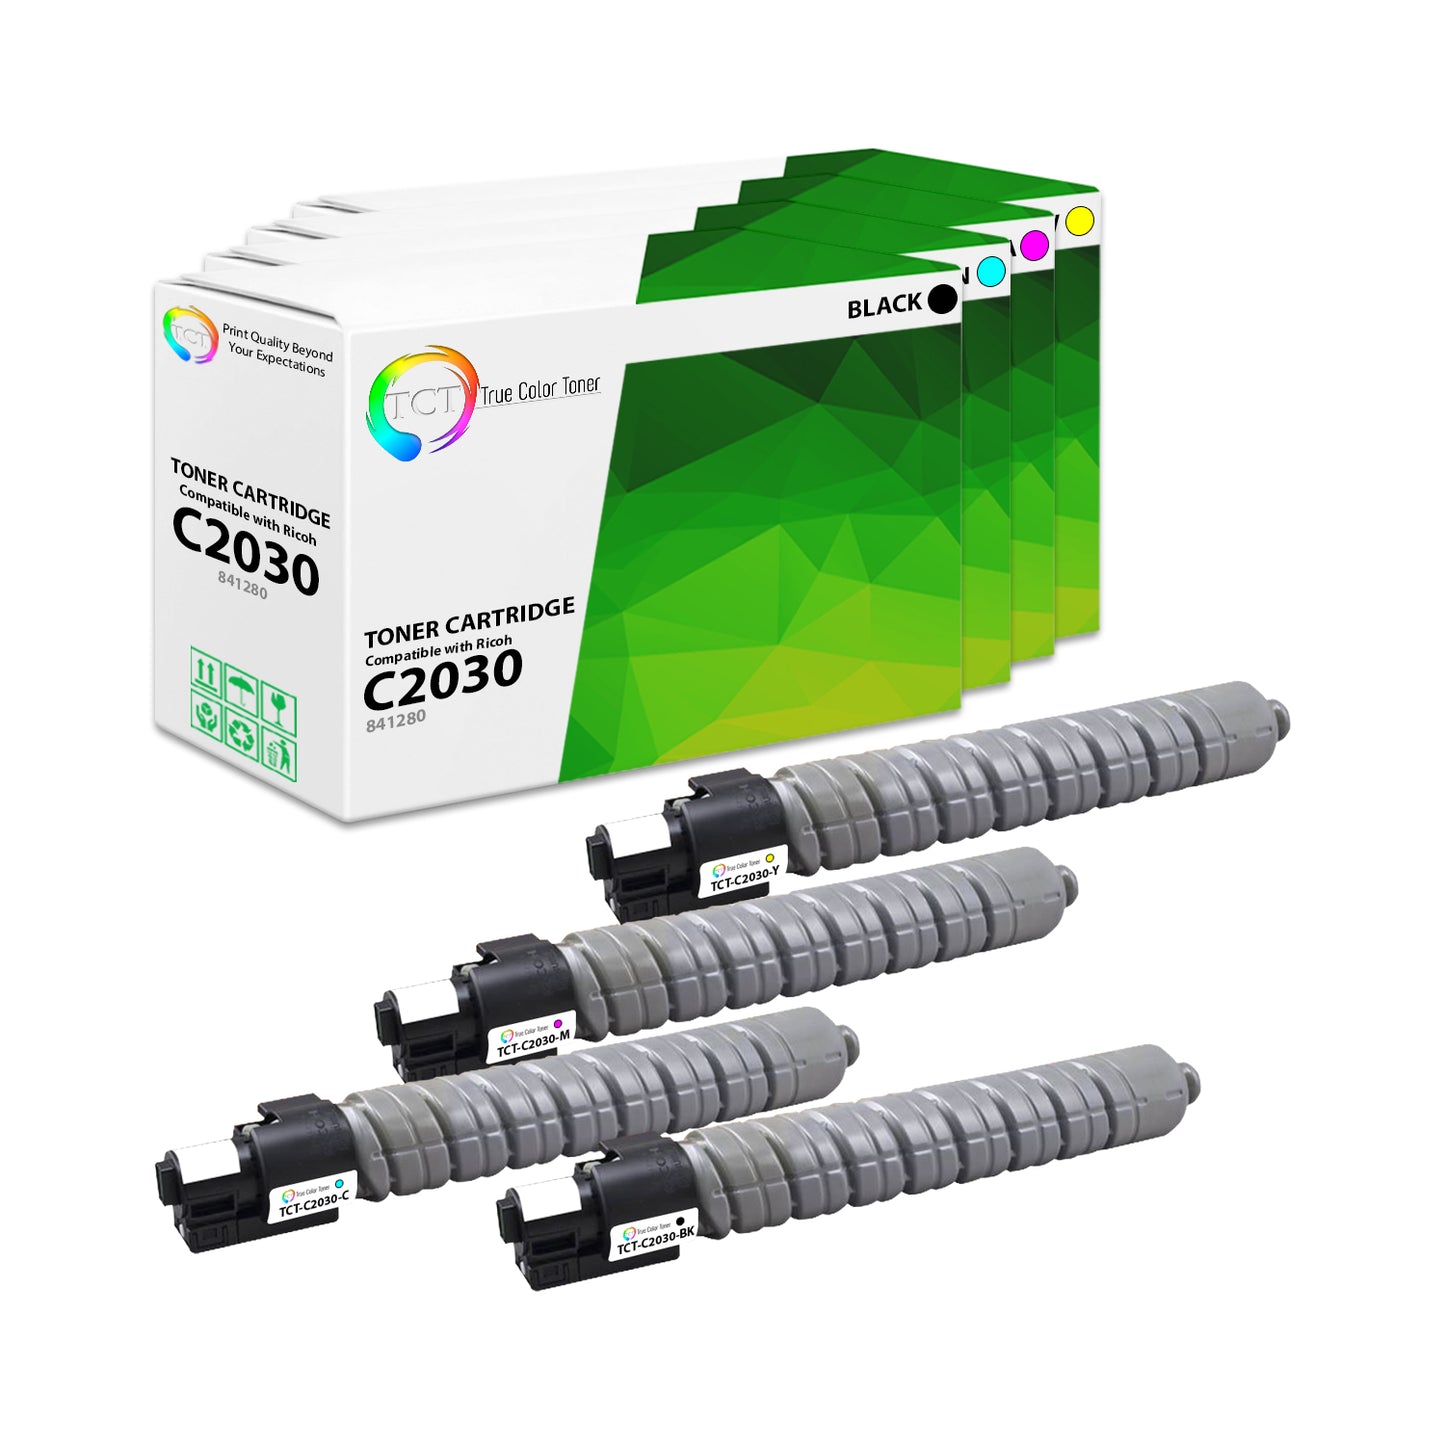 TCT Compatible Toner Cartridge Replacement for the Ricoh C2030 Series - 4 Pack (BK, C, M, Y)